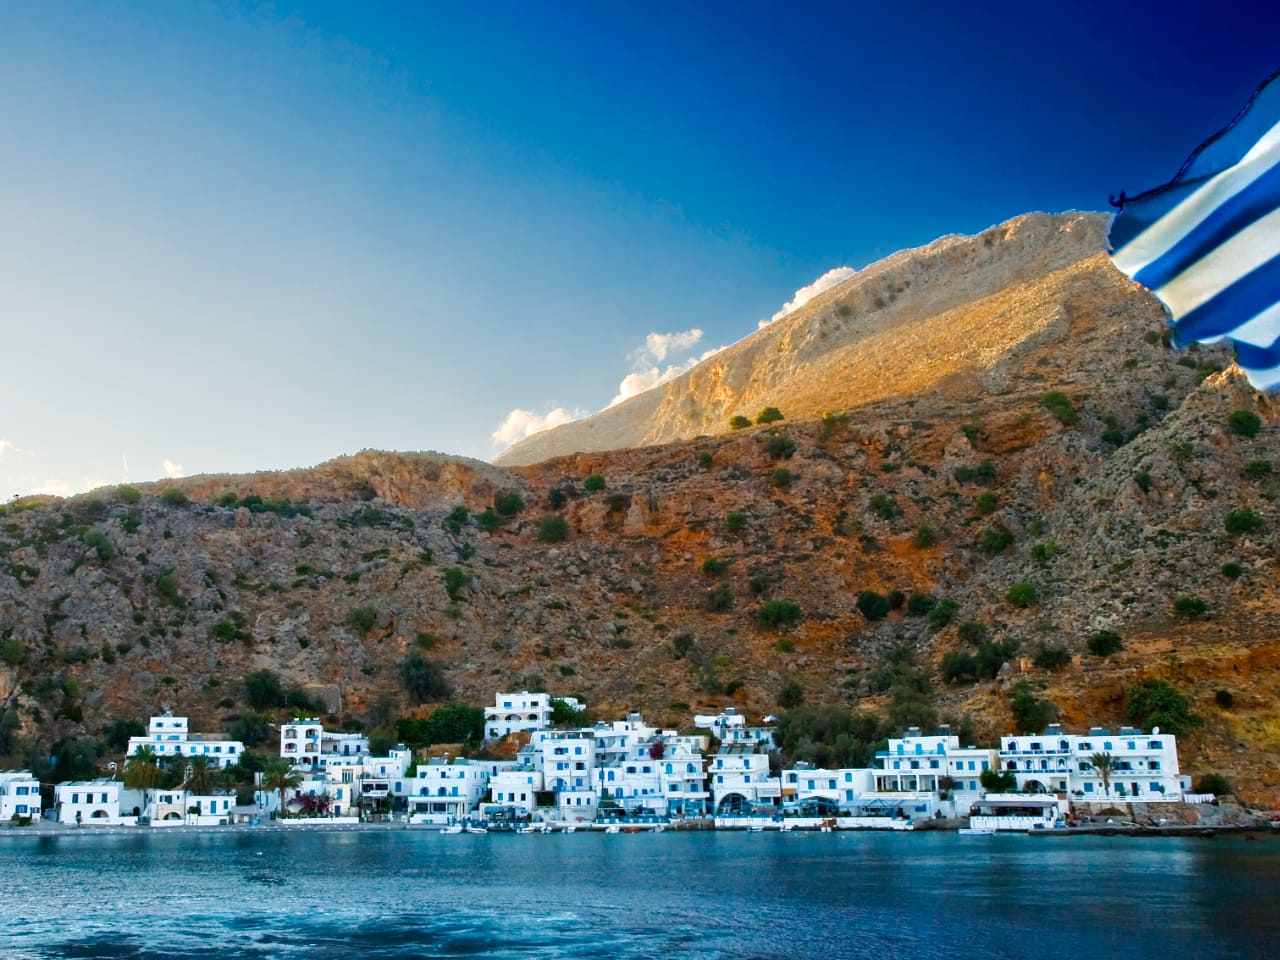 travel guide loutro village, loutro village best hotels, loutro village where to stay, activities loutro village, apartments studios rooms loutro village, ferry loutro village, hiking loutro village, sea kayak loutro village, sailing sfakia loutro, travel tips loutro village